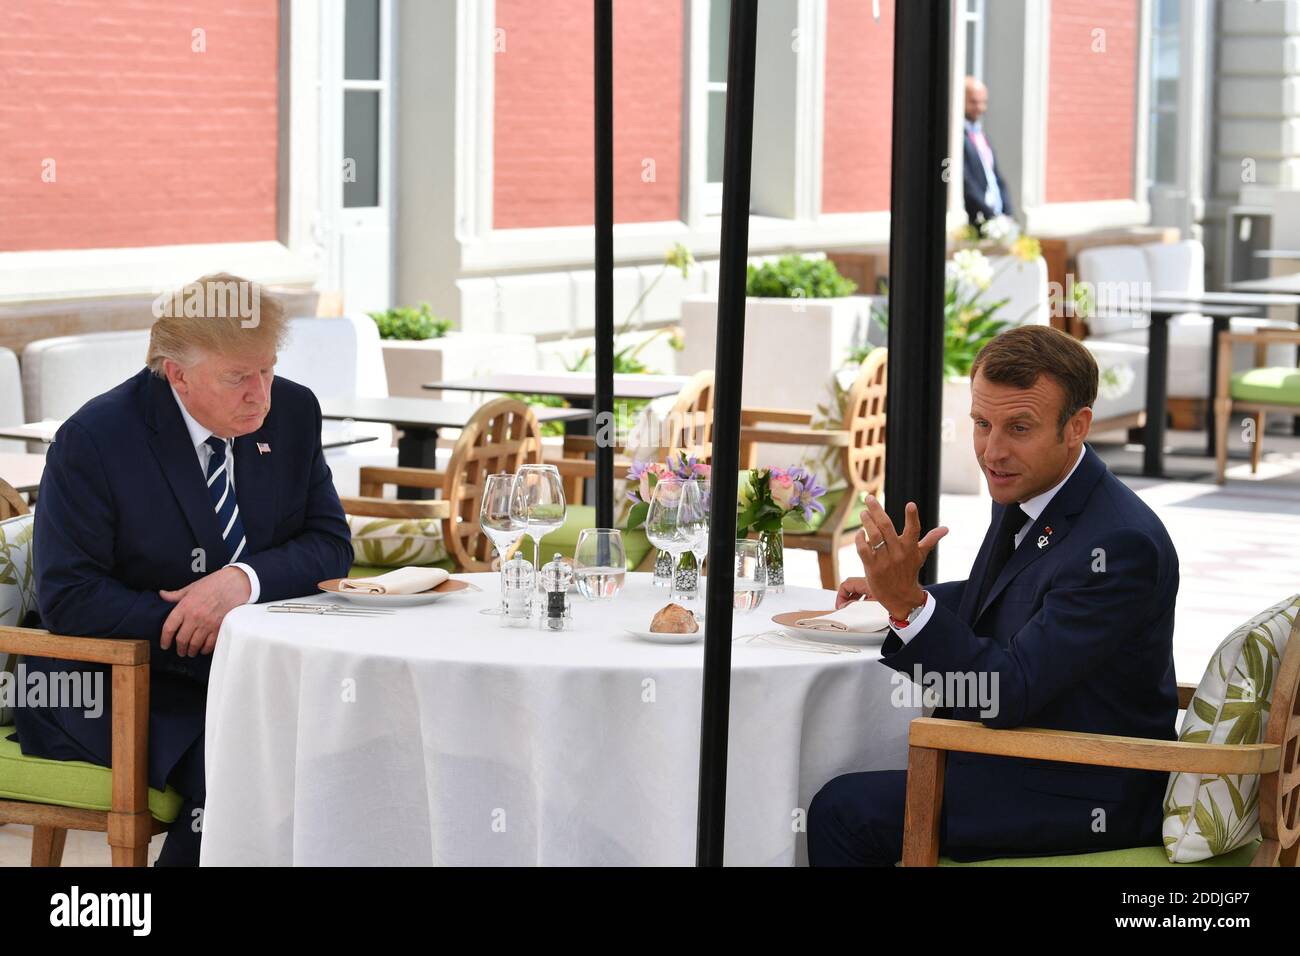 Bilateral Meeting between French President Emmanuel Macron and US President Donald Trump at Hotel du Palais during the G7 summit, in Biarritz, France, on August 24, 2019. Photo by Jacques Witt/Pool/ABACAPRESS.COM Stock Photo